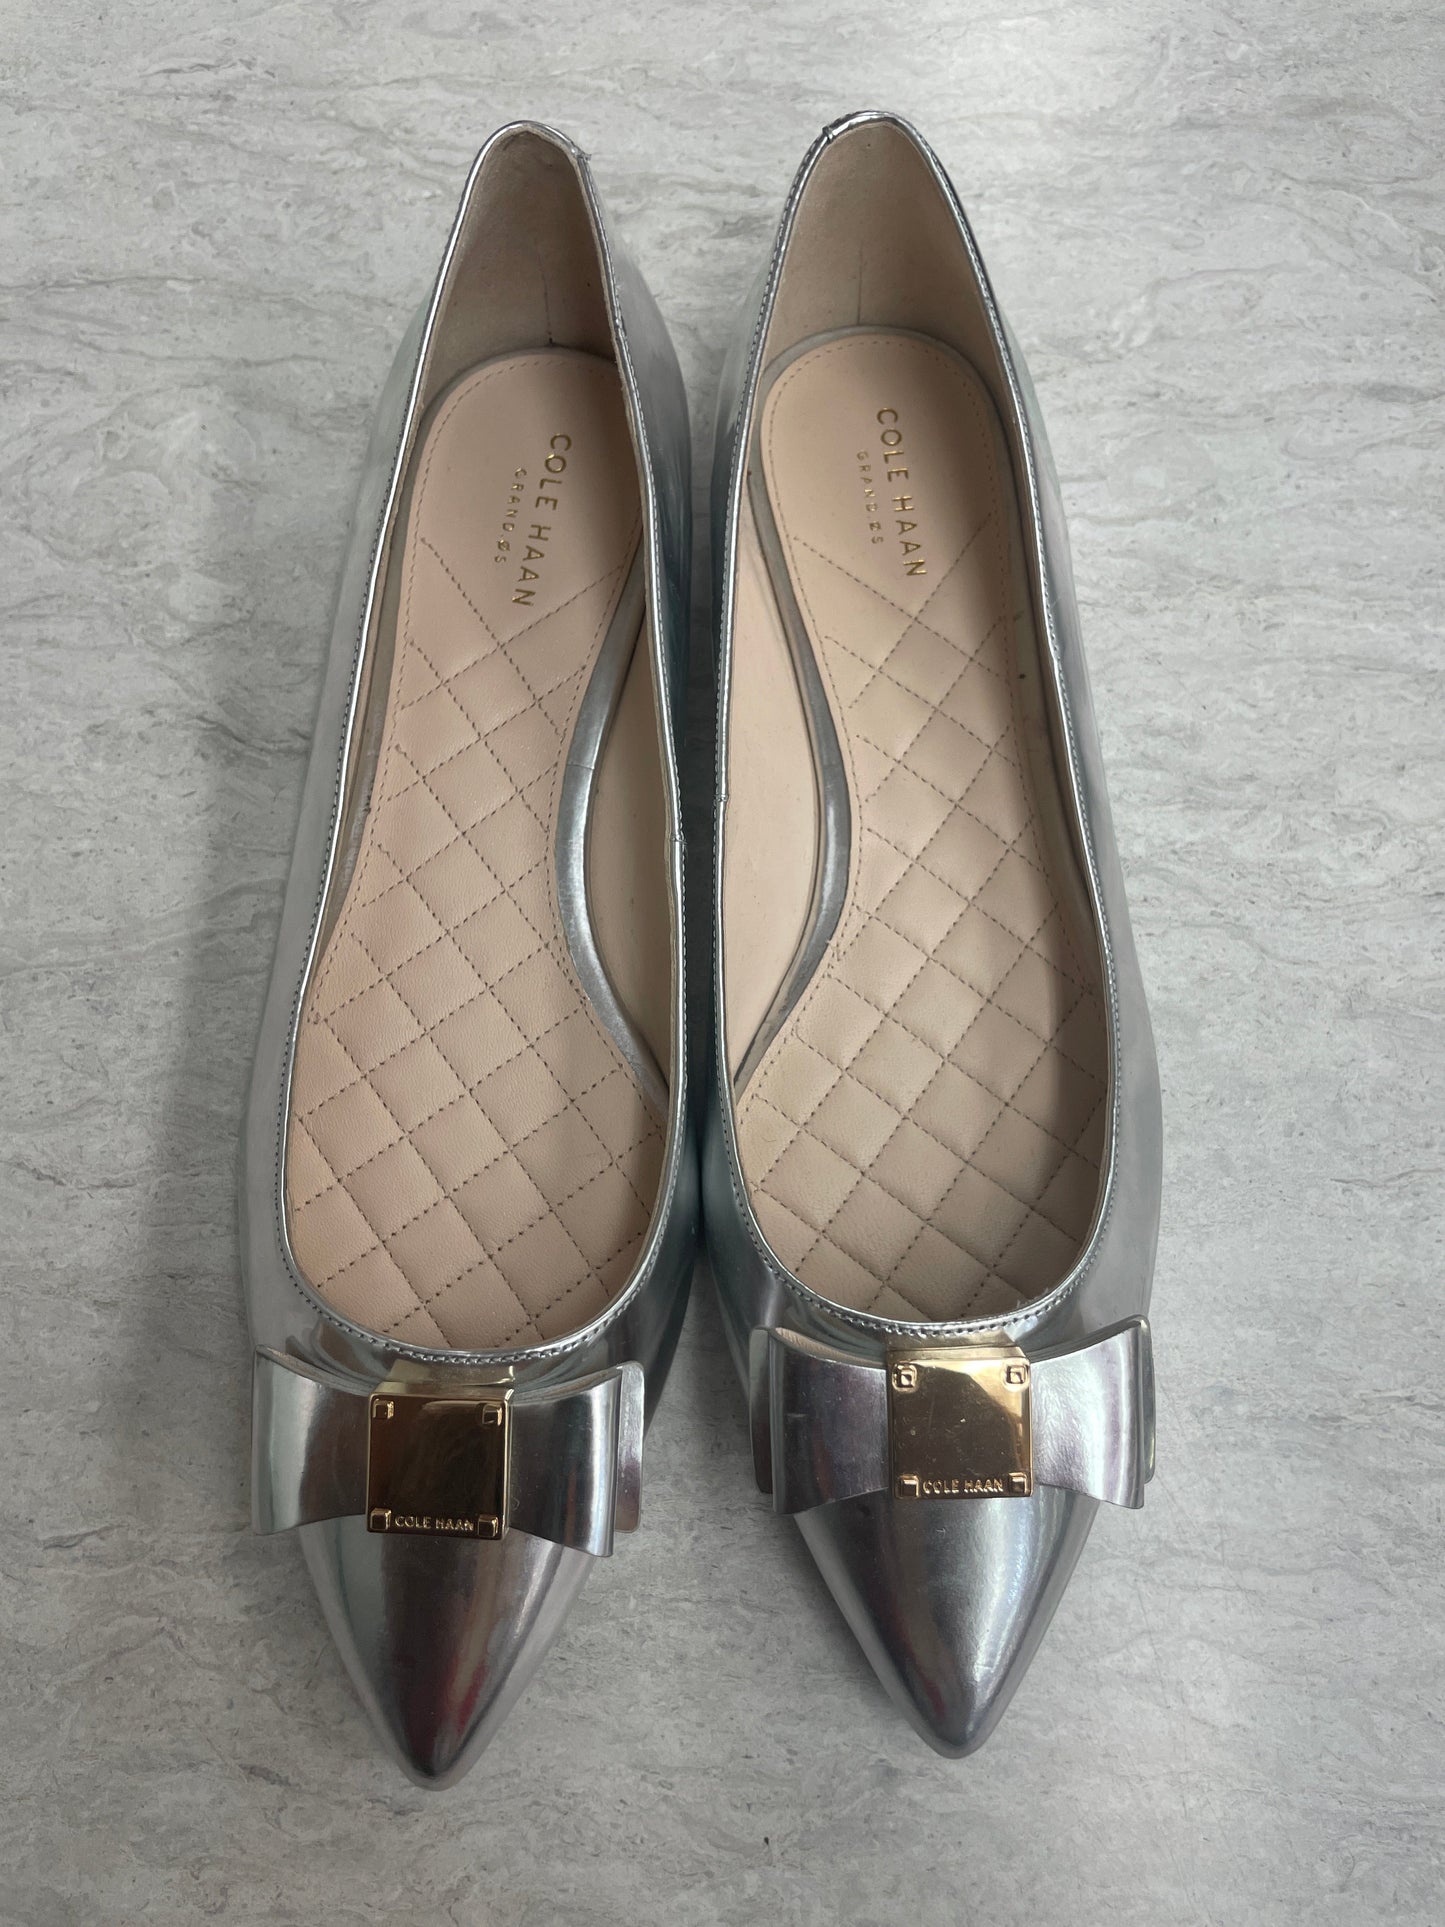 Shoes Flats By Cole-haan  Size: 11